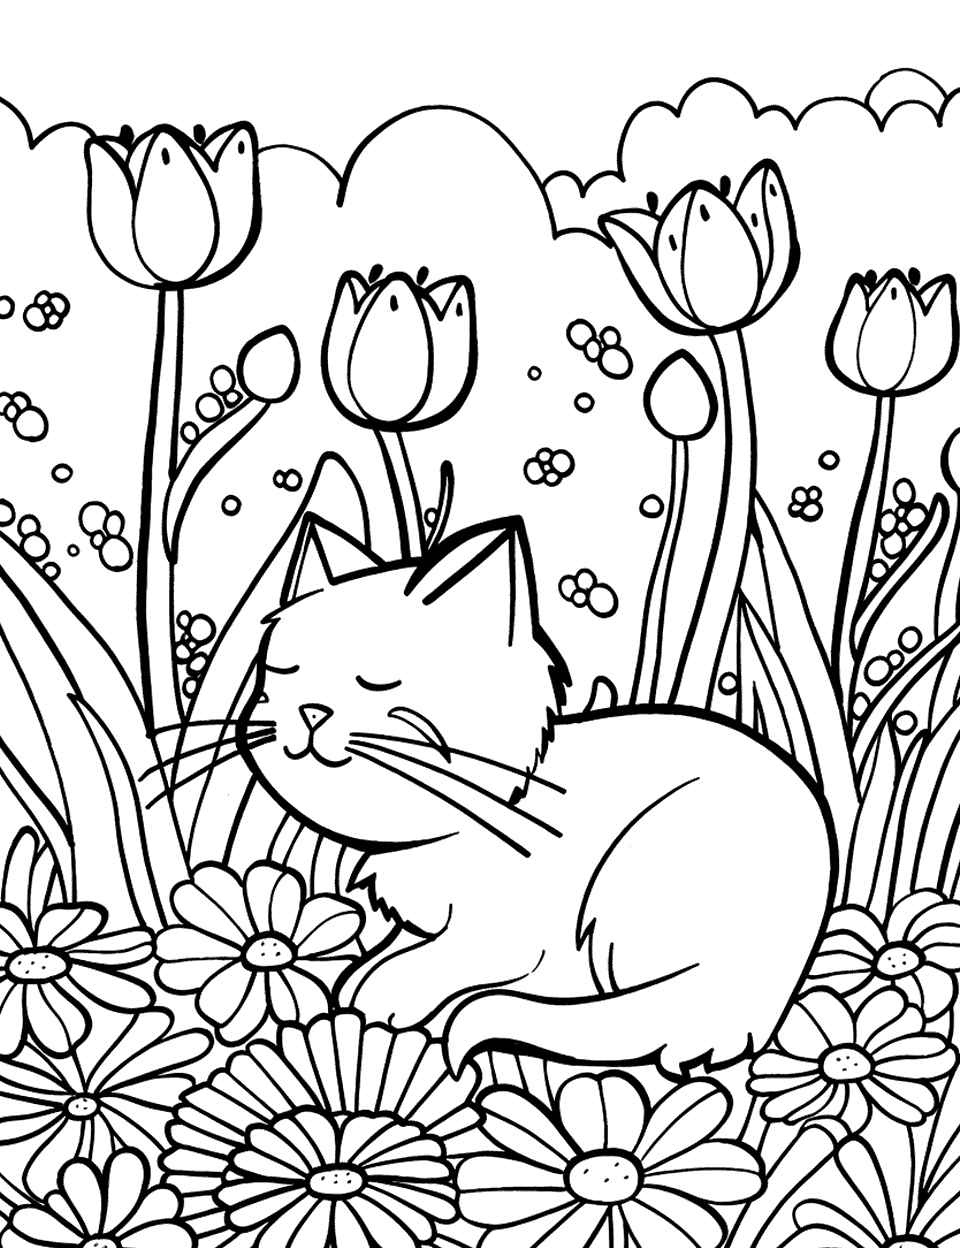 Cat in the Flower Garden Coloring Page - A fluffy cat lounging among the tulips and daisies in a beautiful flower garden.